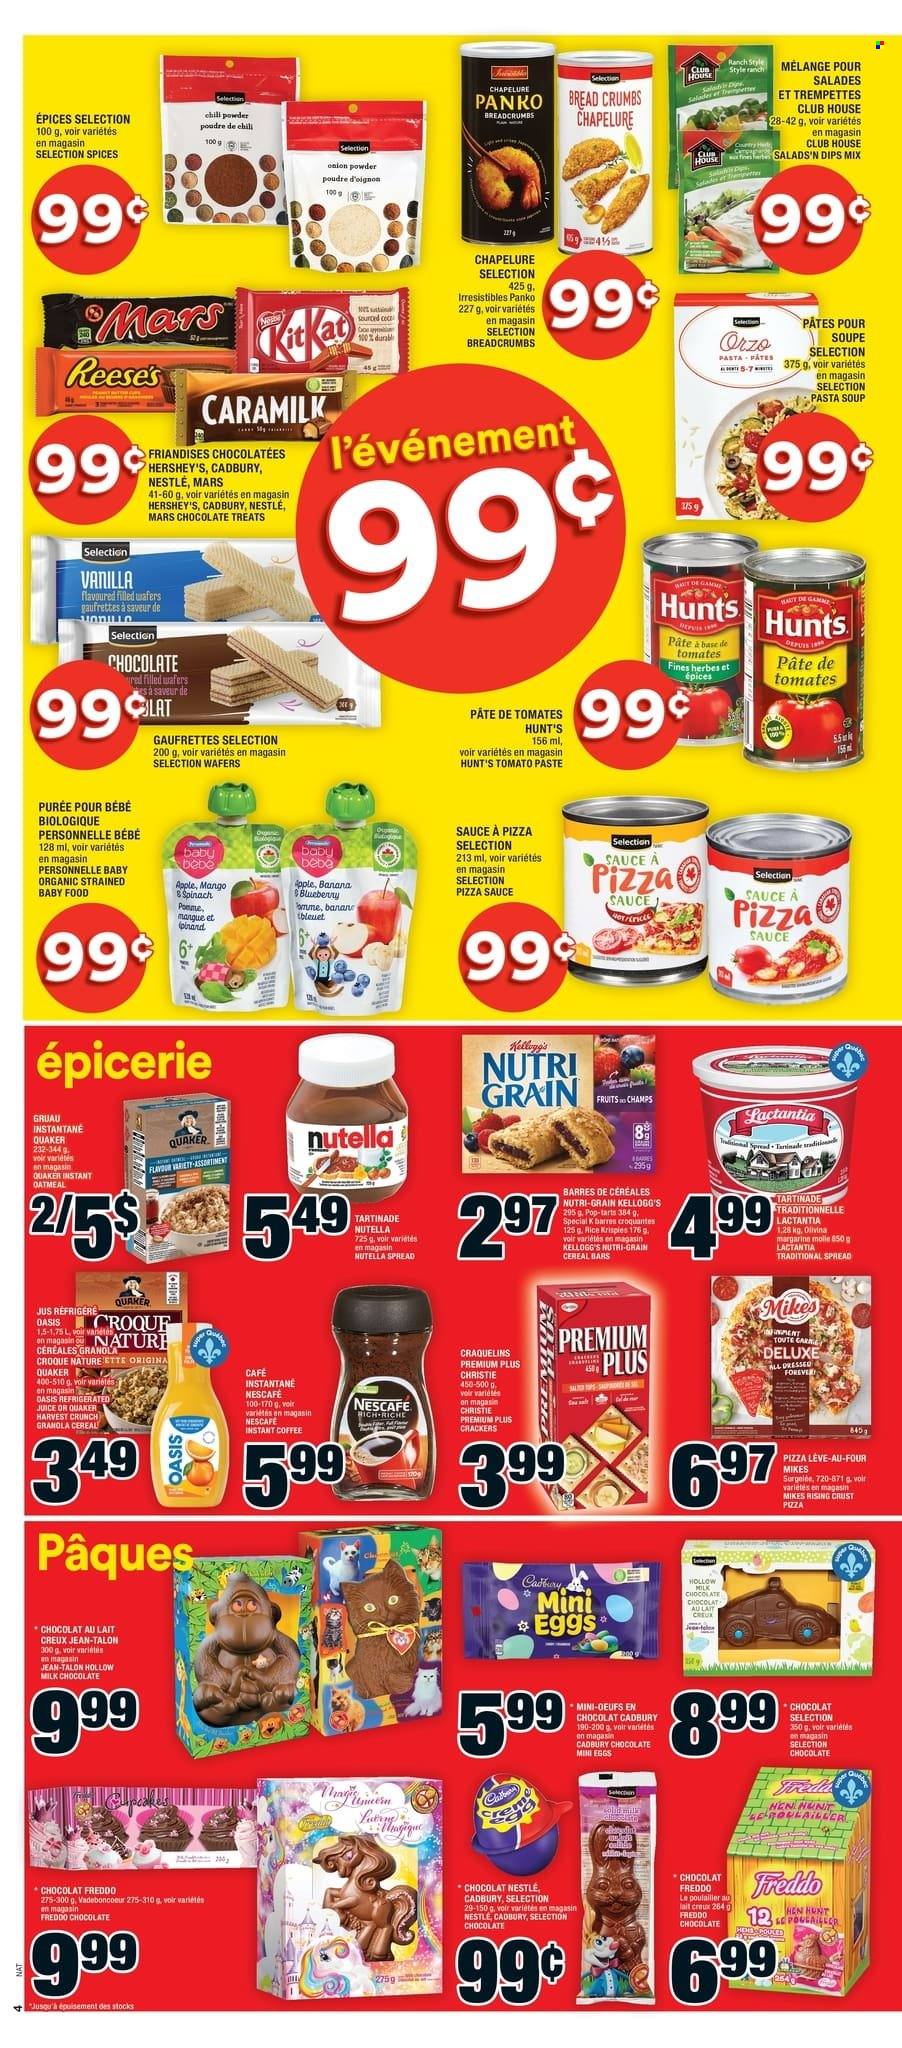 thumbnail - Super C Flyer - March 16, 2023 - March 22, 2023 - Sales products - breadcrumbs, panko breadcrumbs, soup, pasta, sauce, Quaker, margarine, Reese's, Hershey's, milk chocolate, wafers, Mars, cereal bar, crackers, Kellogg's, Cadbury, Pop-Tarts, oatmeal, tomato paste, cereals, Rice Krispies, Nutri-Grain, onion powder, juice, coffee, instant coffee, granola, Nestlé, Nutella, Nescafé. Page 5.